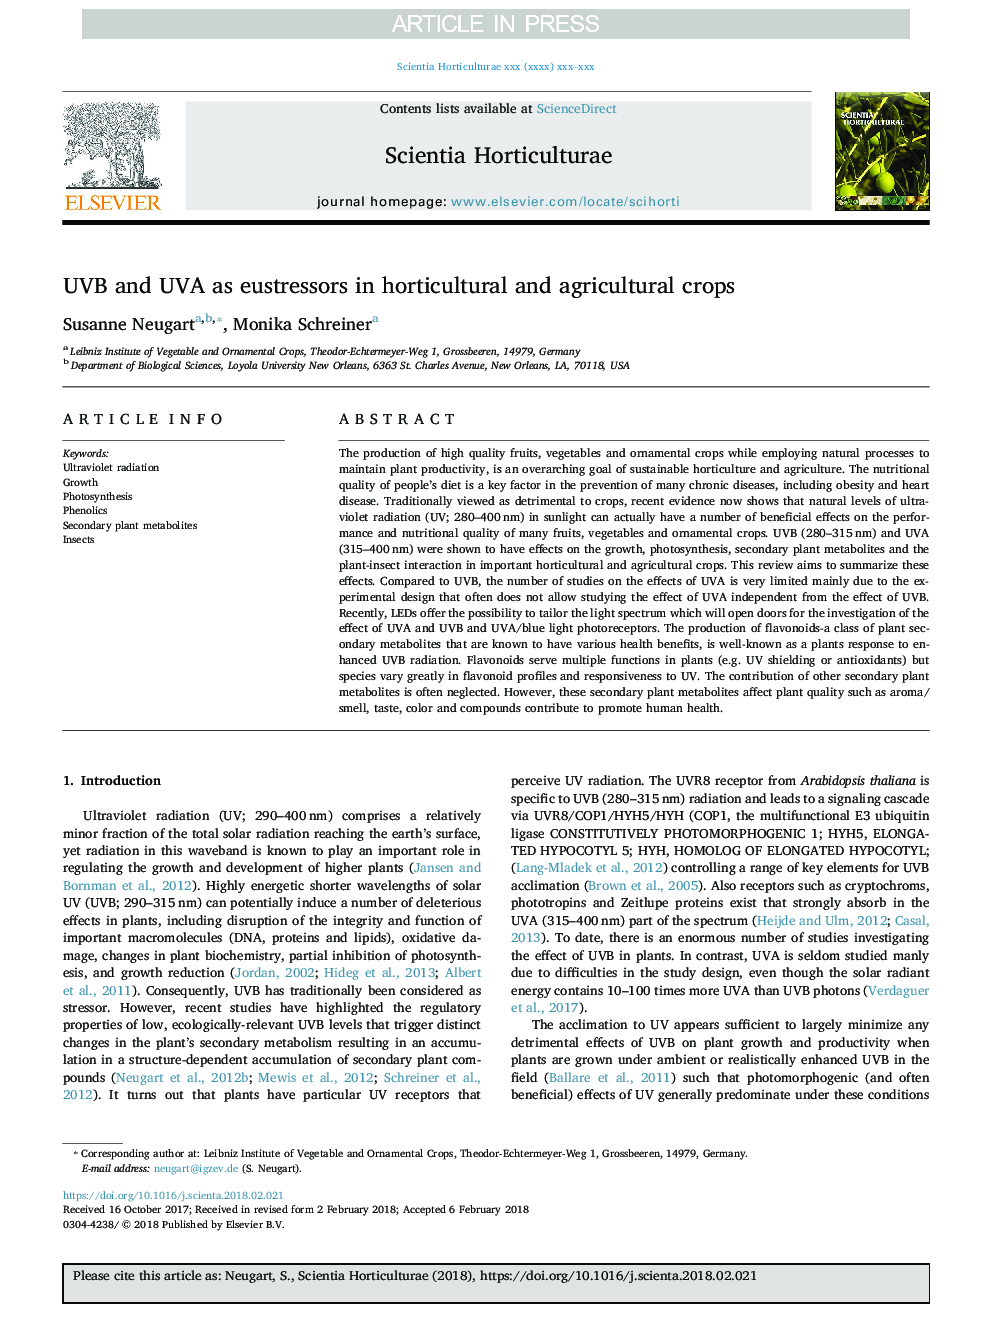 UVB and UVA as eustressors in horticultural and agricultural crops